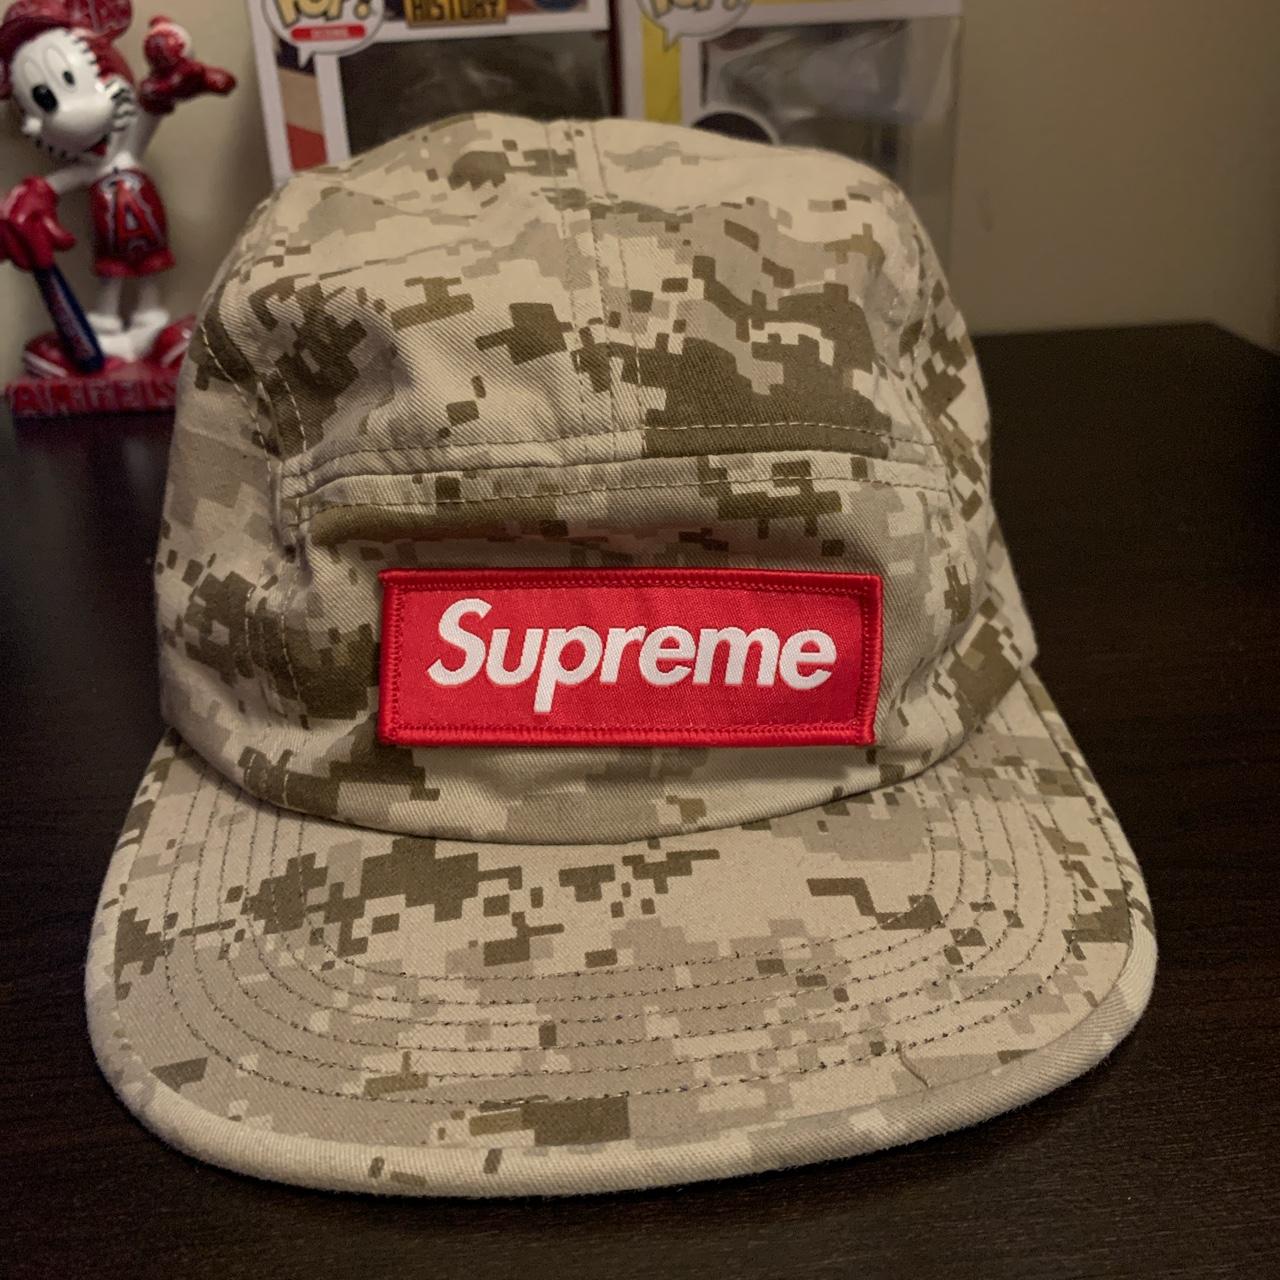 Supreme hat - NYCO twill camp cap! Colorway is tan...